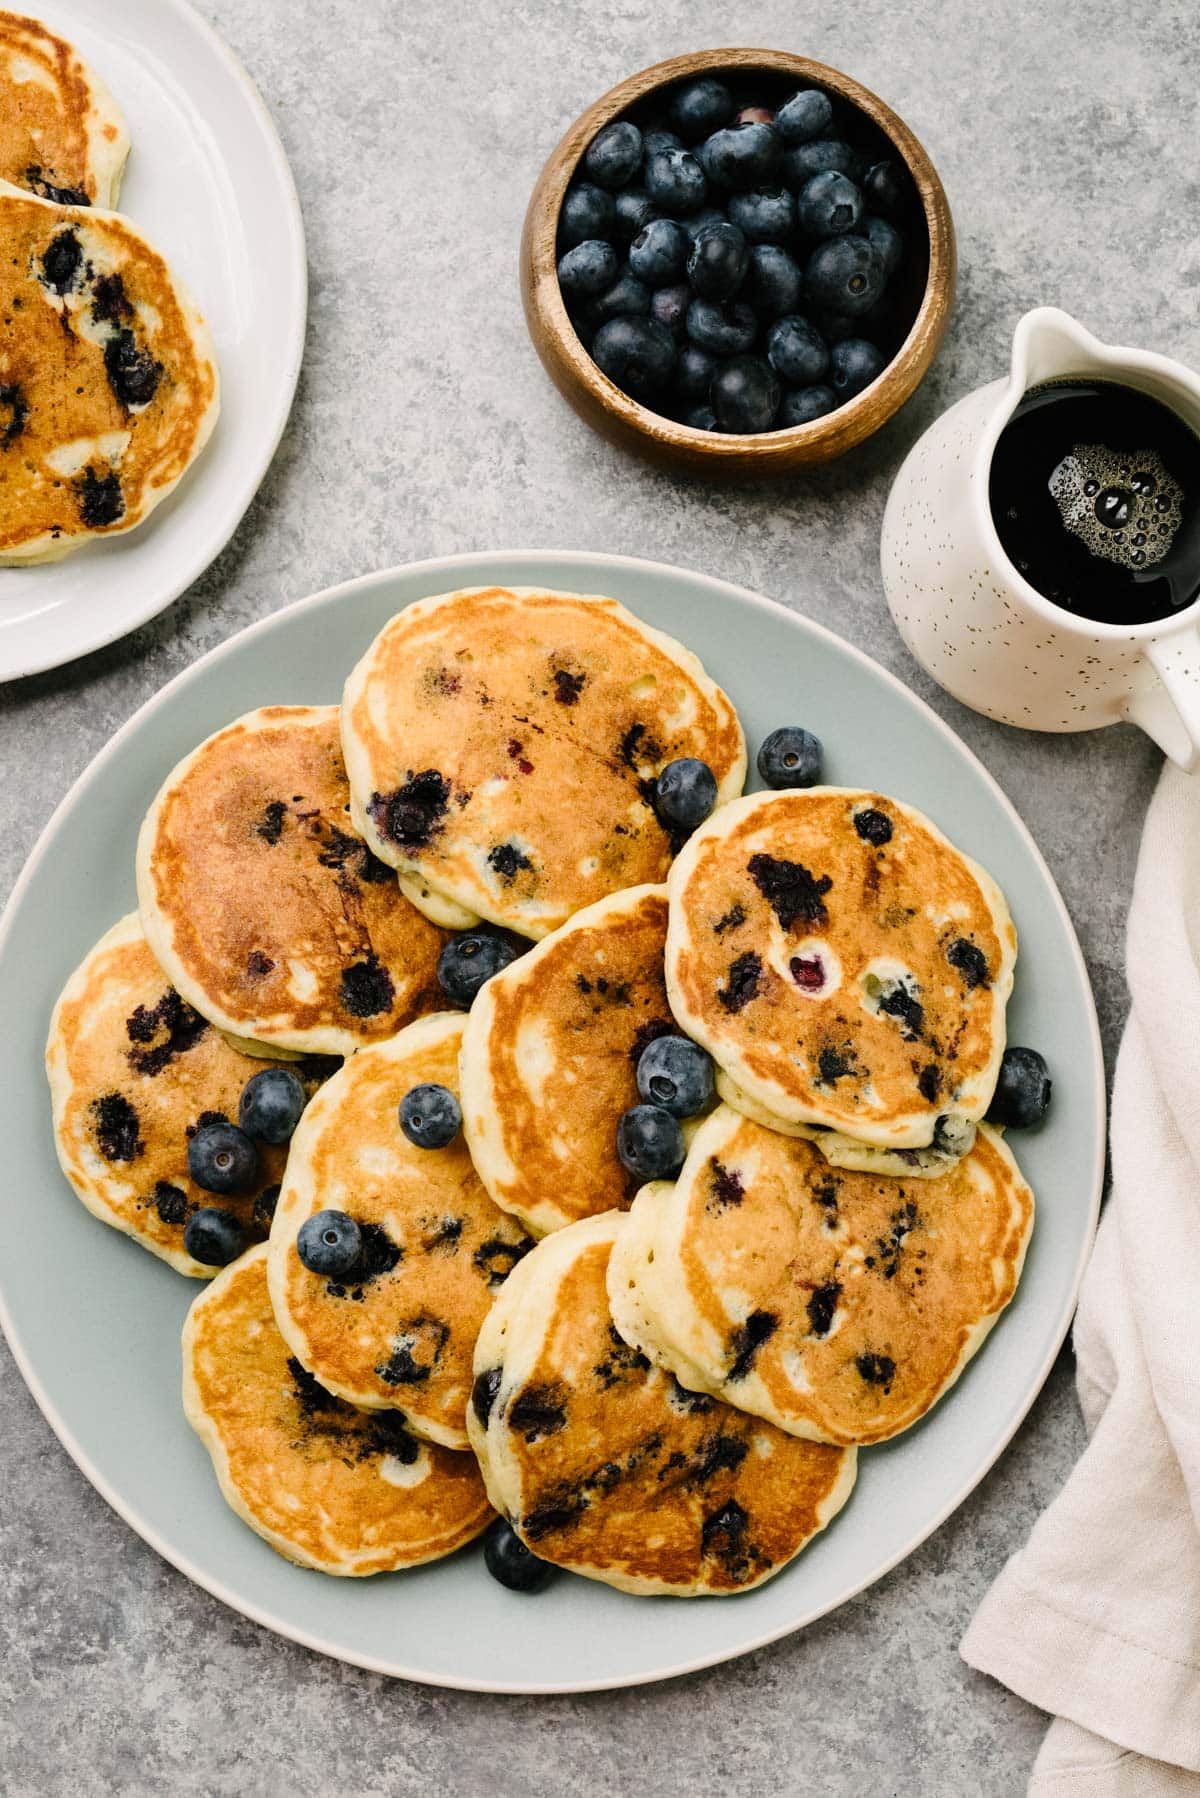 A platter of homemade blueberry pancakes with buttermilk on a concrete background, surrounded by a linen napkin, small pitcher of maple syrup, and bowl of fresh blueberries.